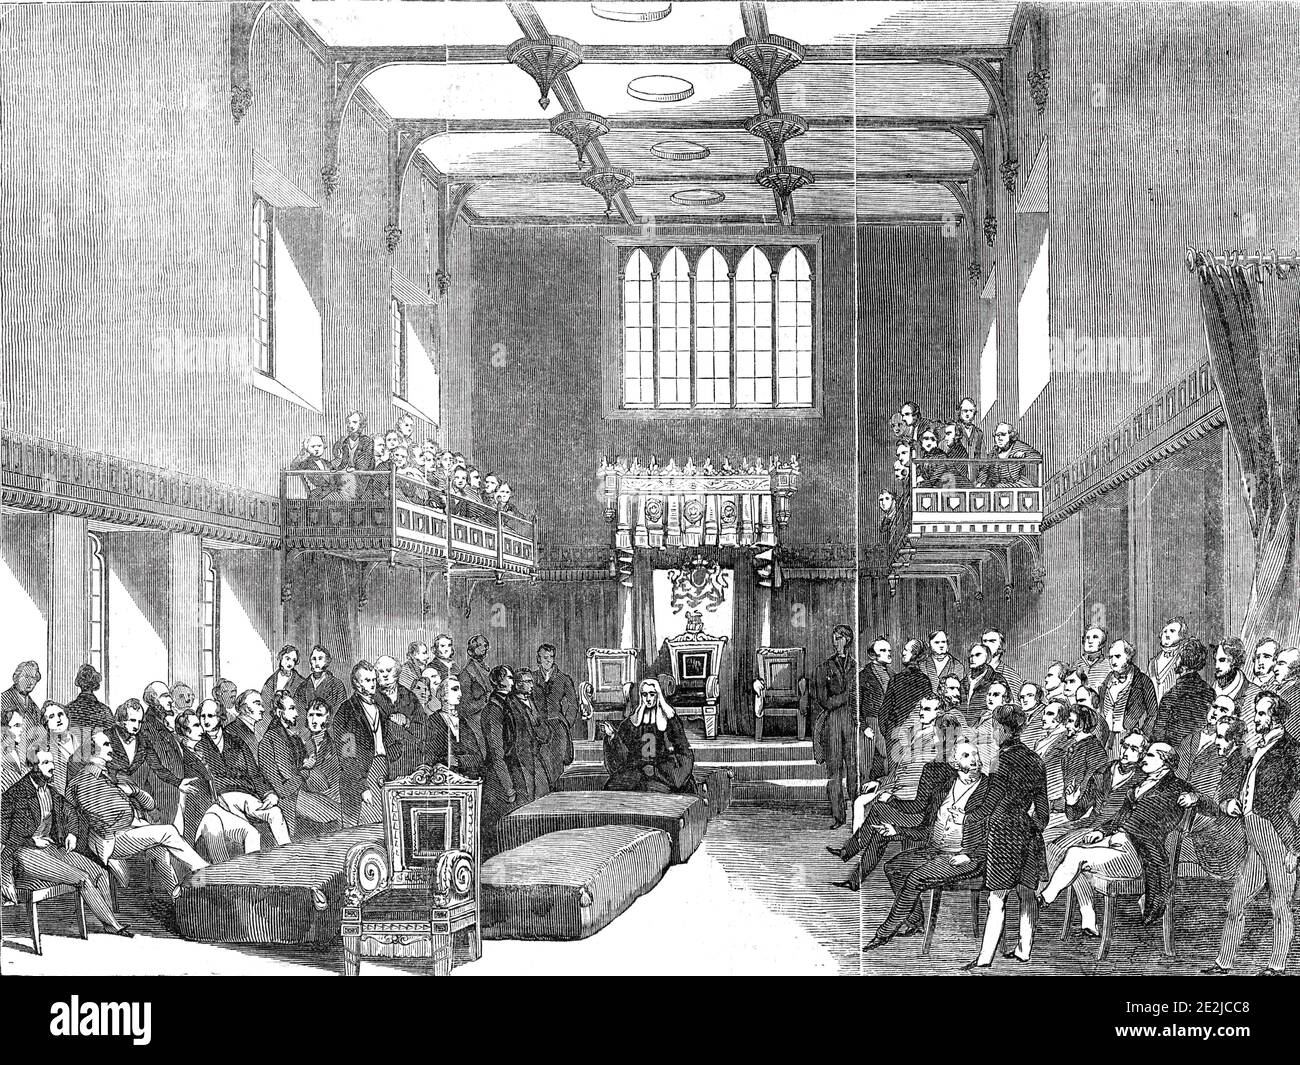 House of Lords - the Lord Chancellor pronouncing judgment in the case of the Queen v. O'Connell, 1844. Interior of the Palace of Westminster in London. Irish nattionalist and political leader Daniel O'Connell had been sentenced twelve months for conspiracy. He was released after three months, the charges having been quashed on appeal to the House of Lords. From &quot;Illustrated London News&quot;, 1844, Vol V. Stock Photo